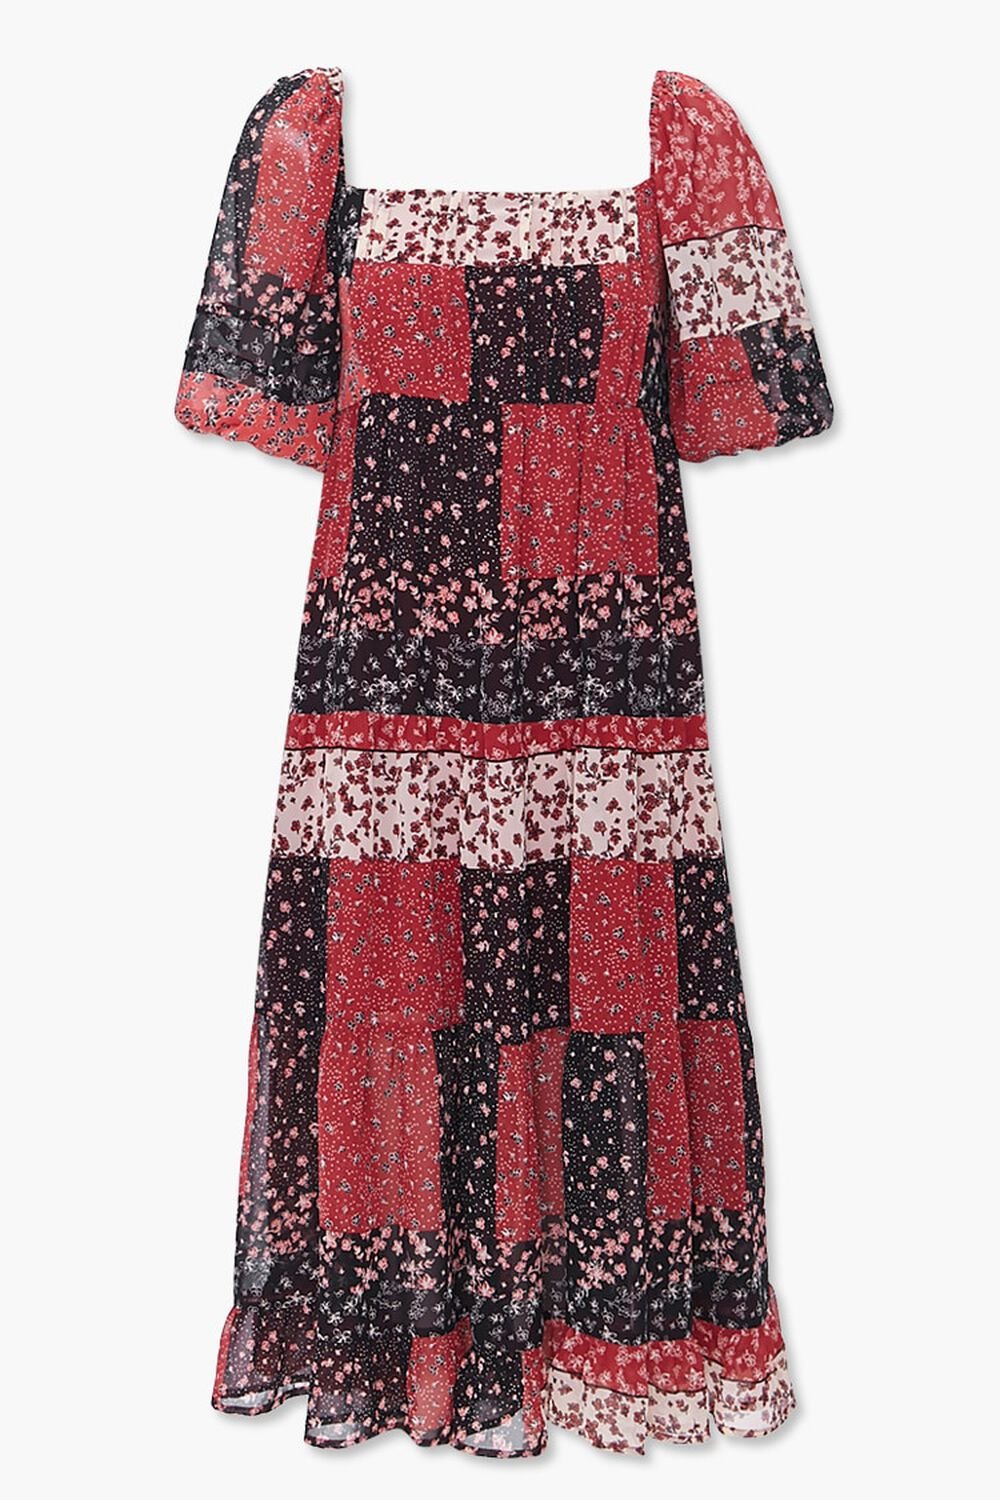 RED/MULTI Ditsy Floral Midi Dress, image 1